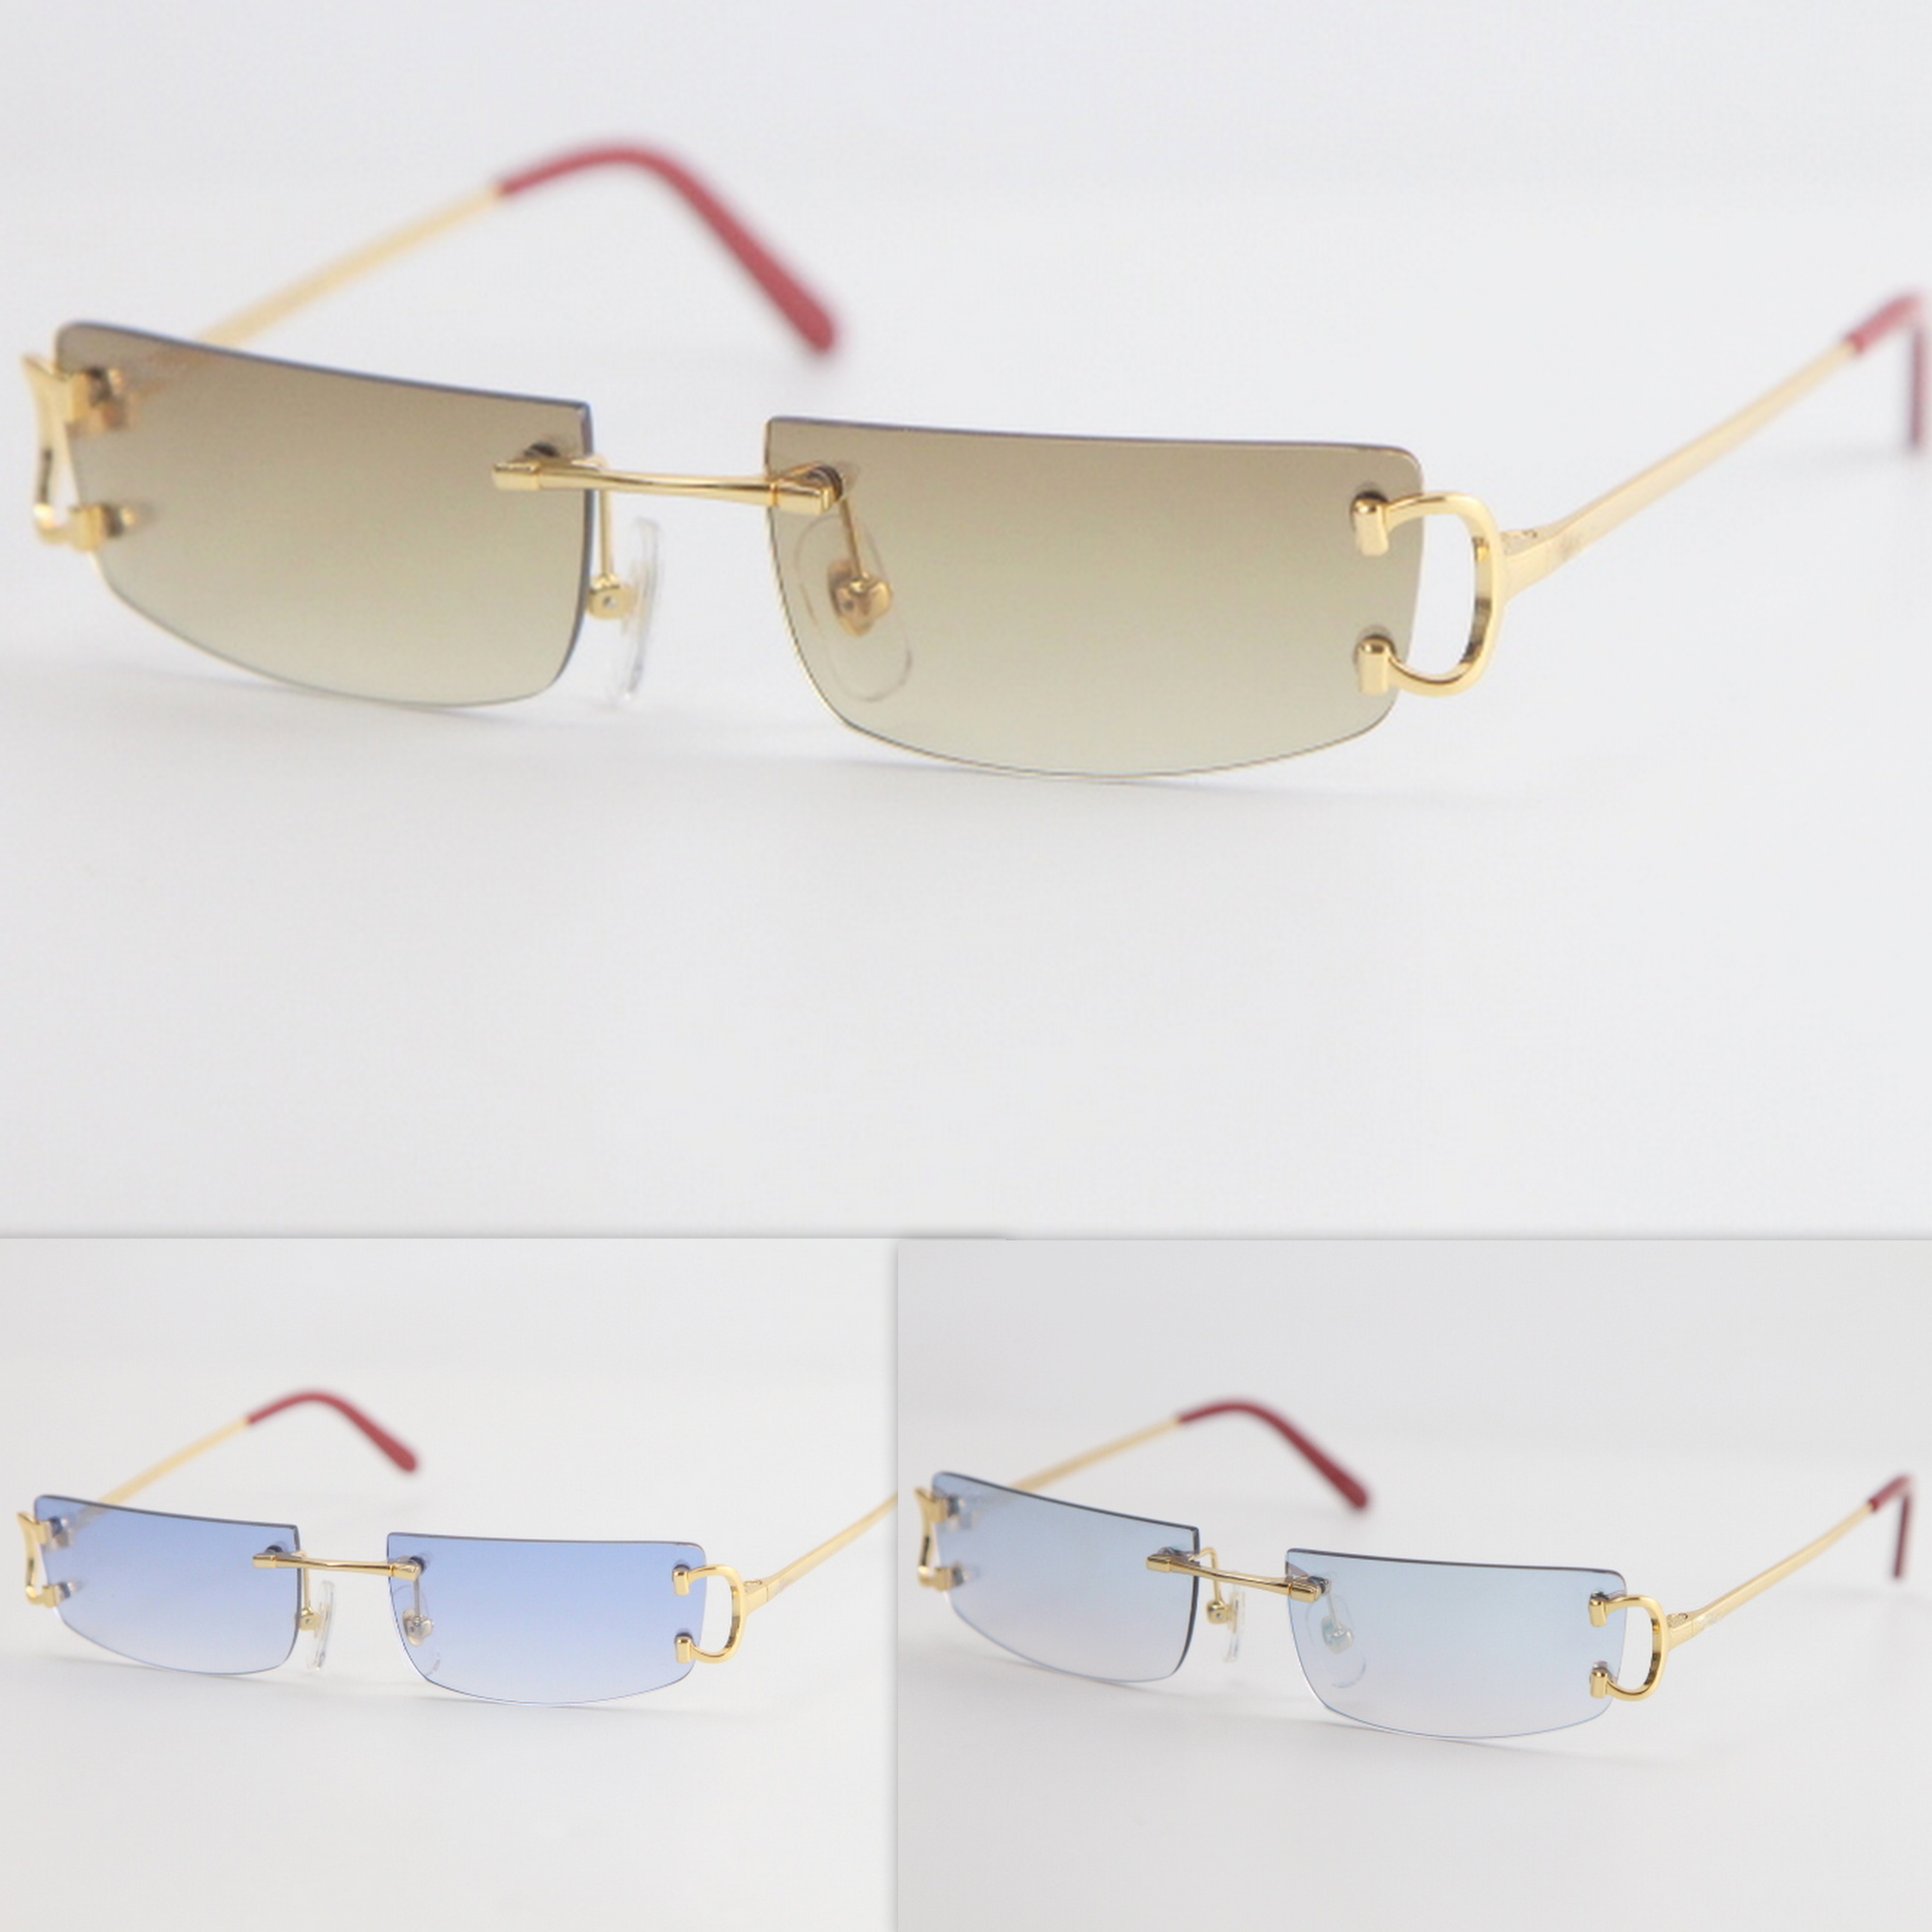 Image of Metal Small Square Rimless Sunglasses Men Women C Decoration Unisex Eyewear for Summer Outdoor Traveling gold frame Size:52-18-140MM